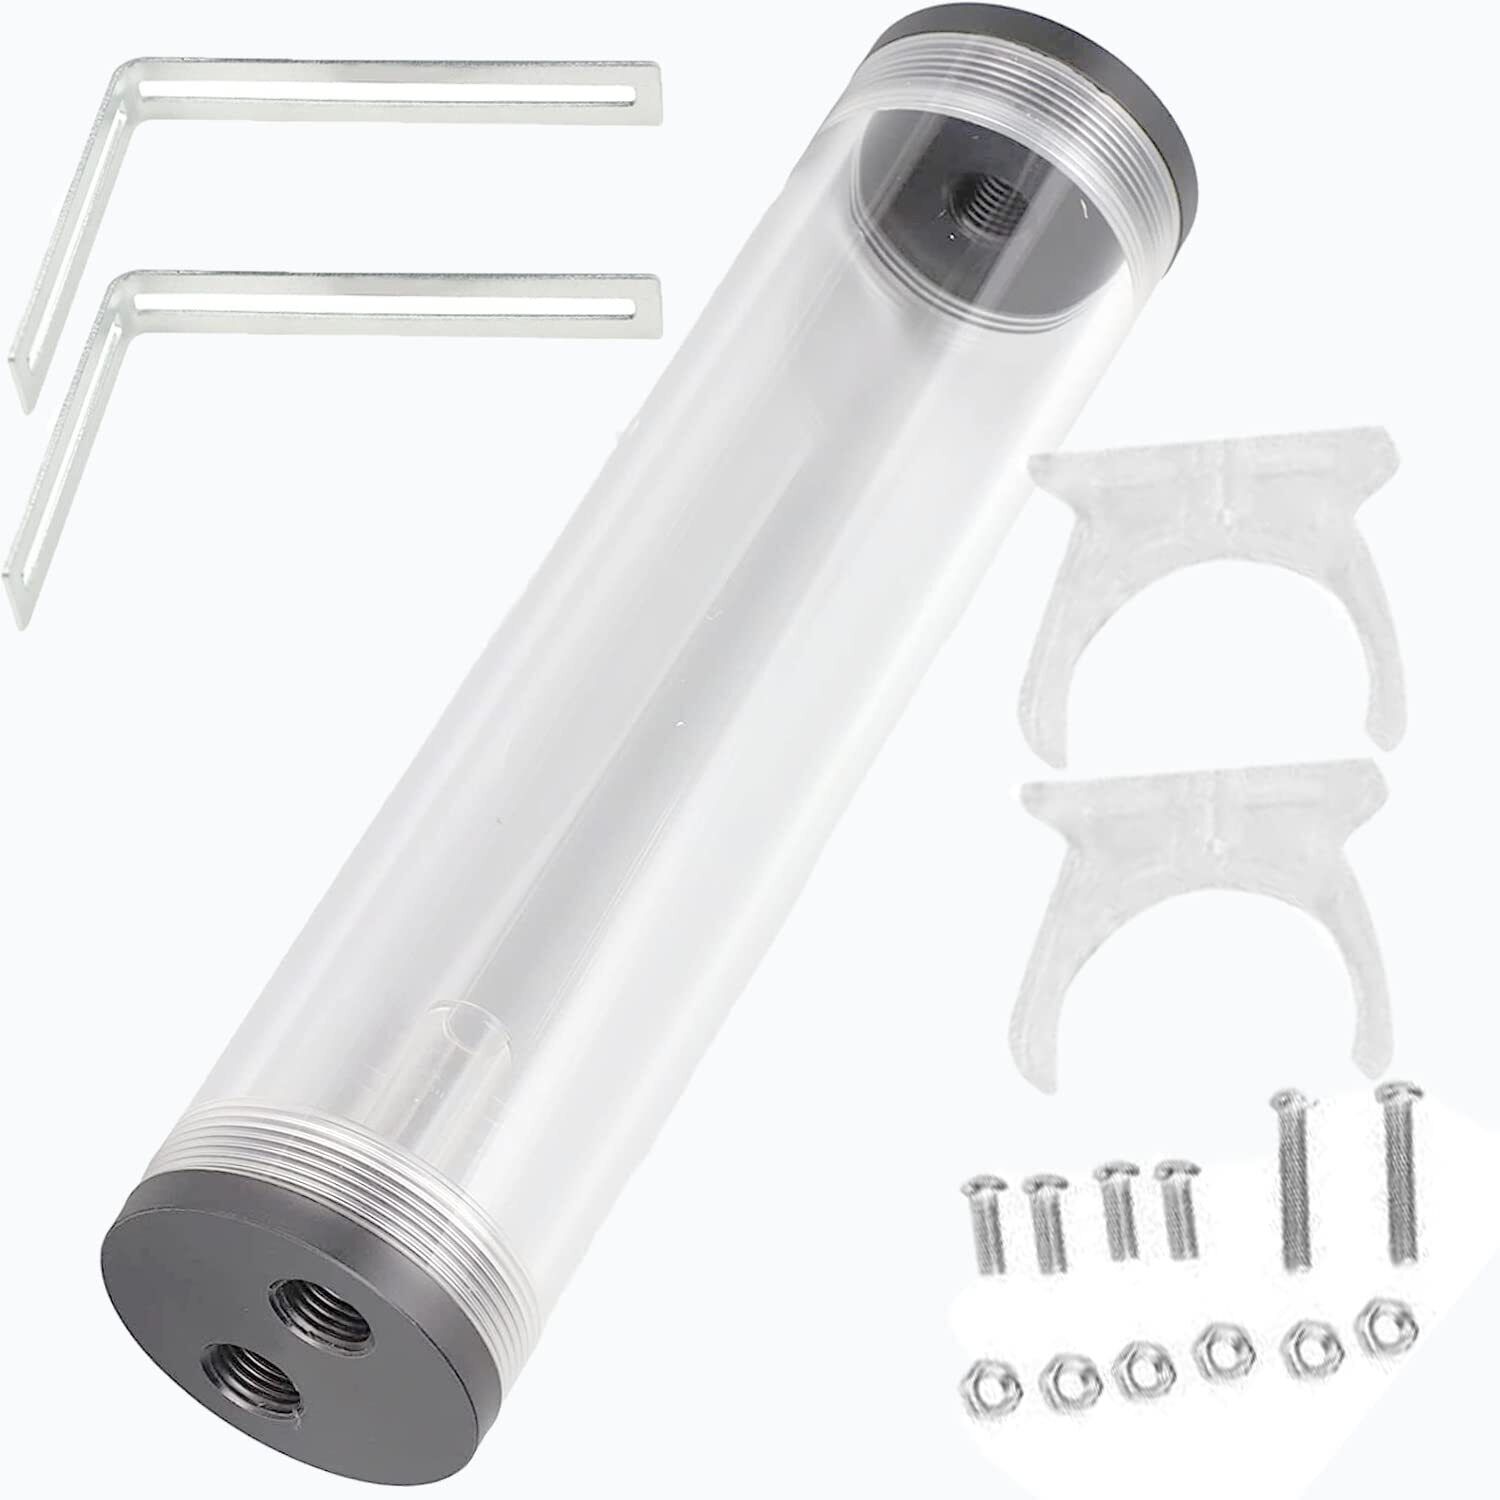 PC Water Tank Reservoir for Computer Water Cooling System-280mm-3*G1/4 Holes ...